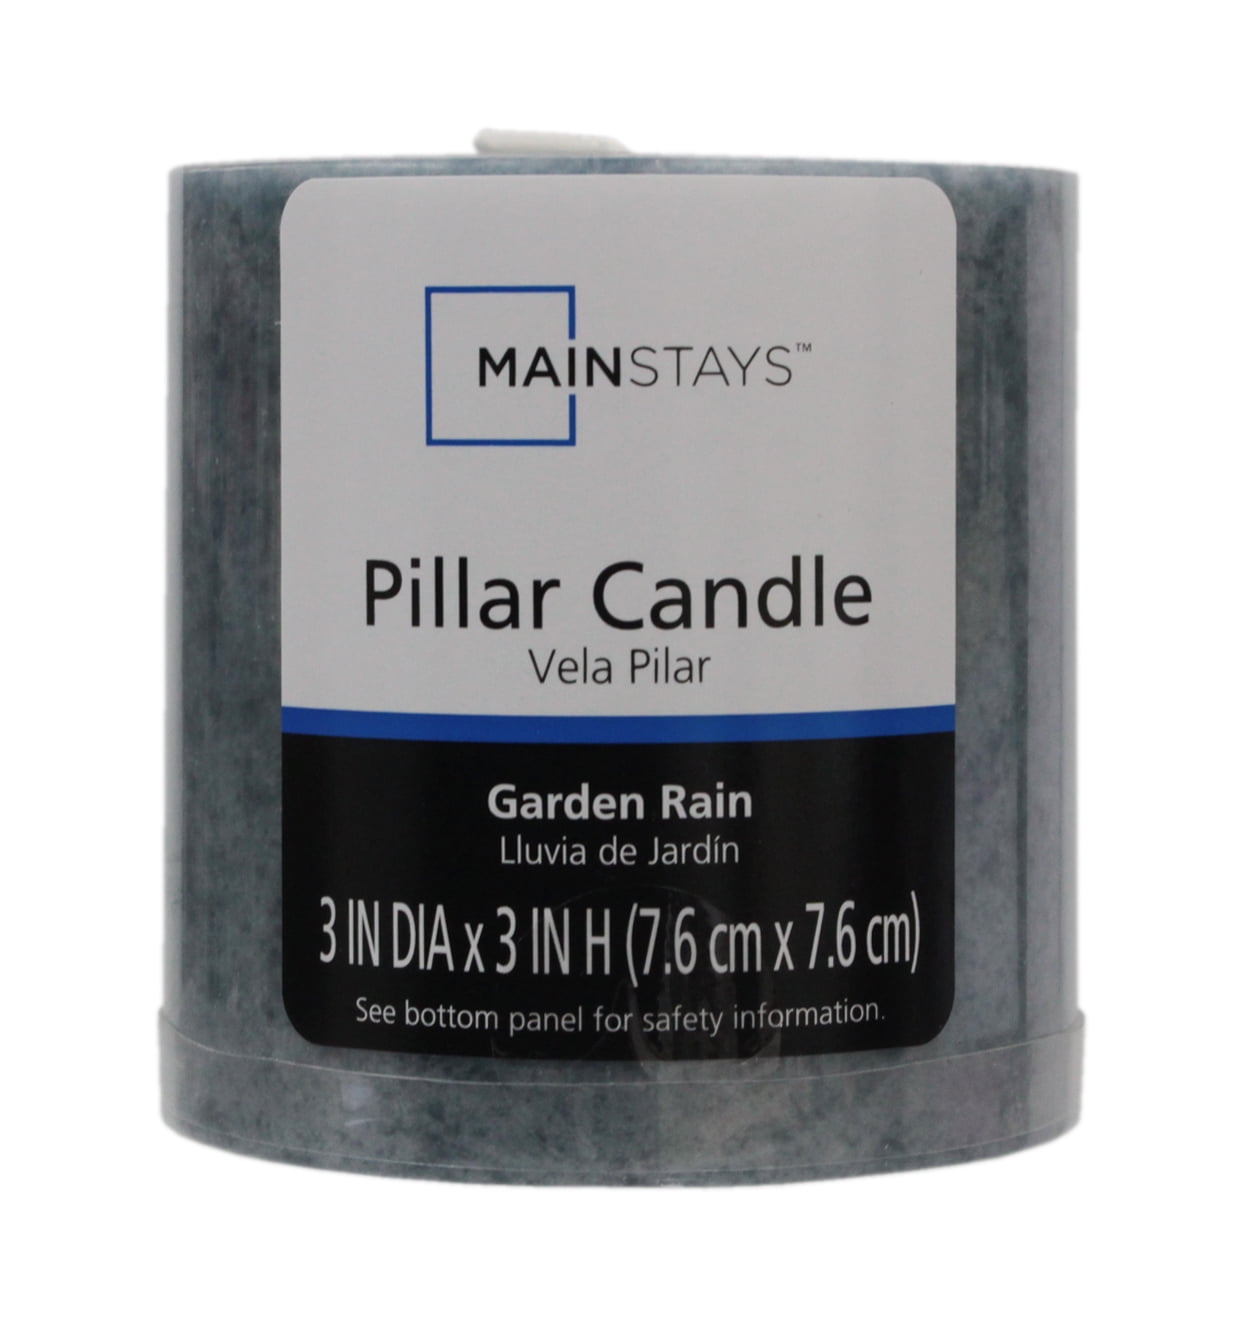 Mainstays Scented Mottled Pillar Candle, 3 x 3 inches, Blue, Garden Rain